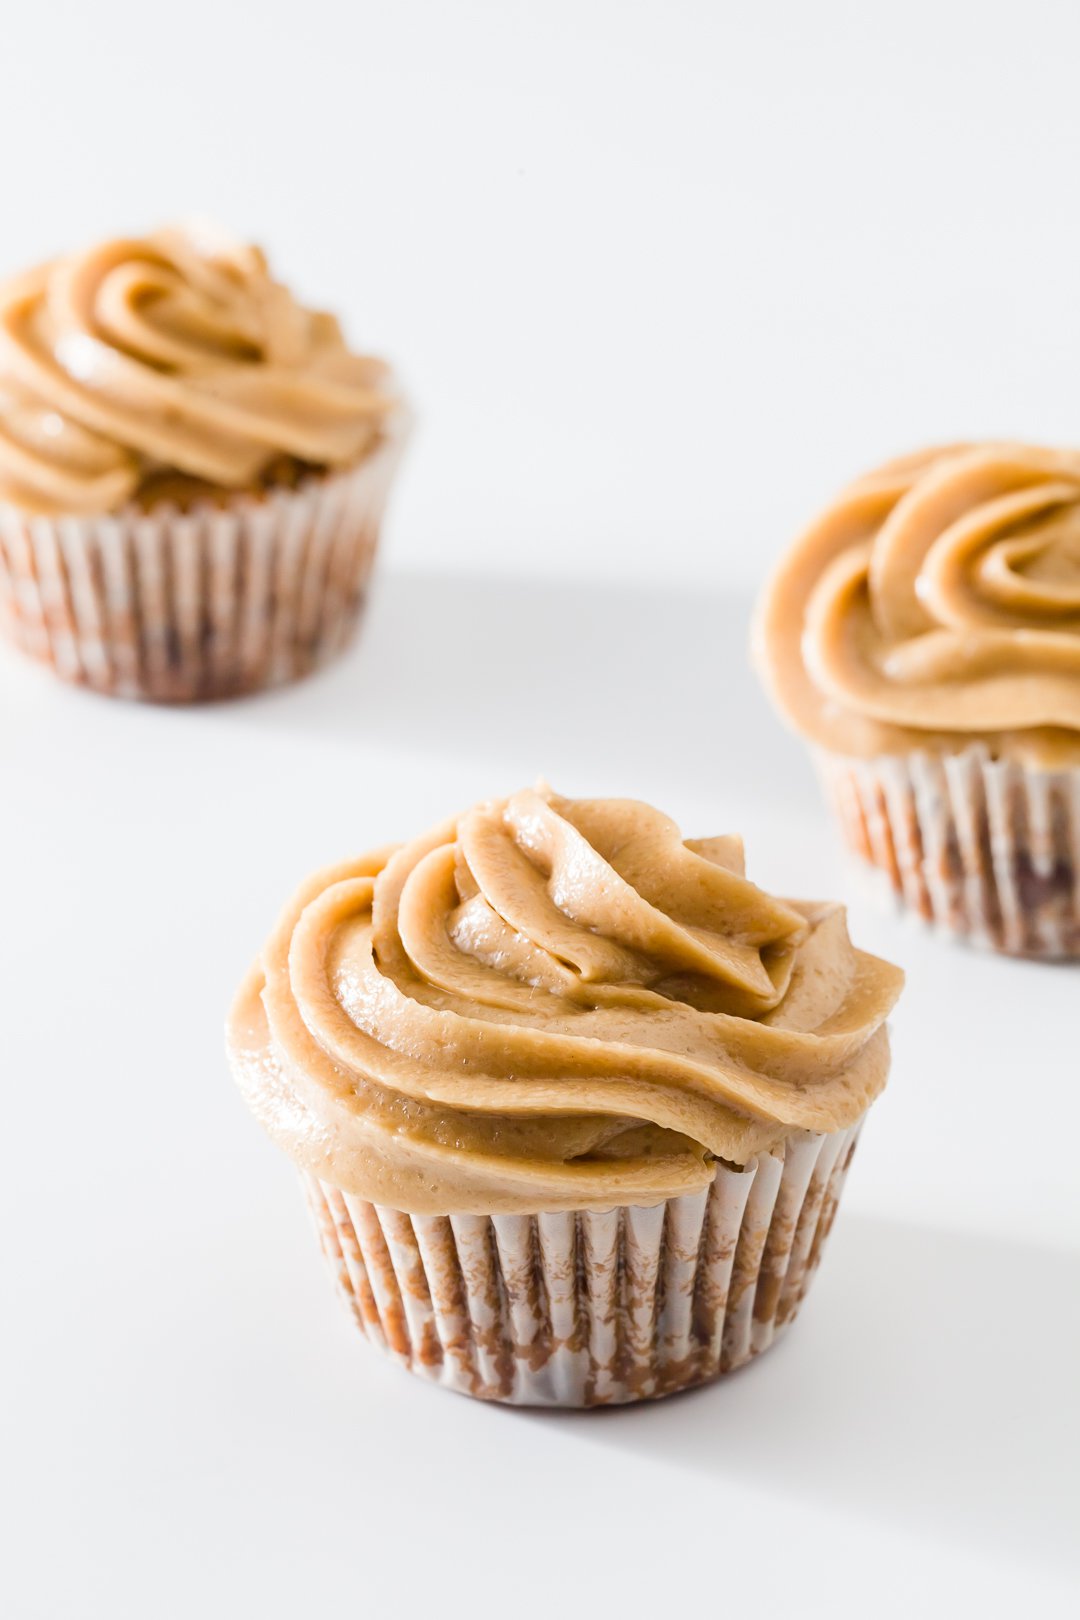 The cupcakes on white background frosted with cookie dough frosting